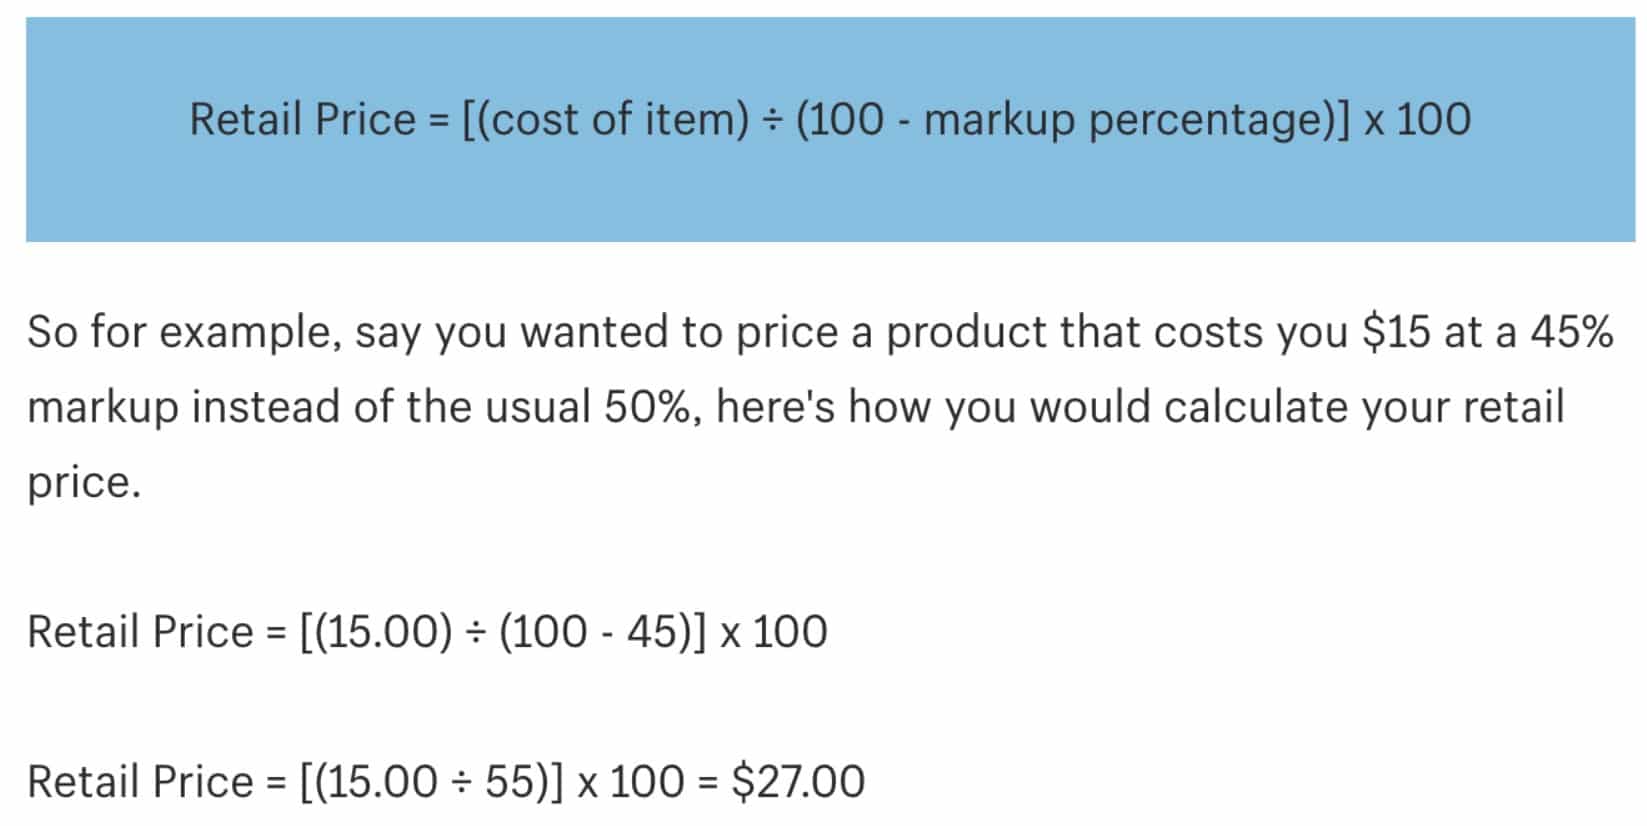 Guide to Ecommerce Shipping Pricing Strategies [2024]